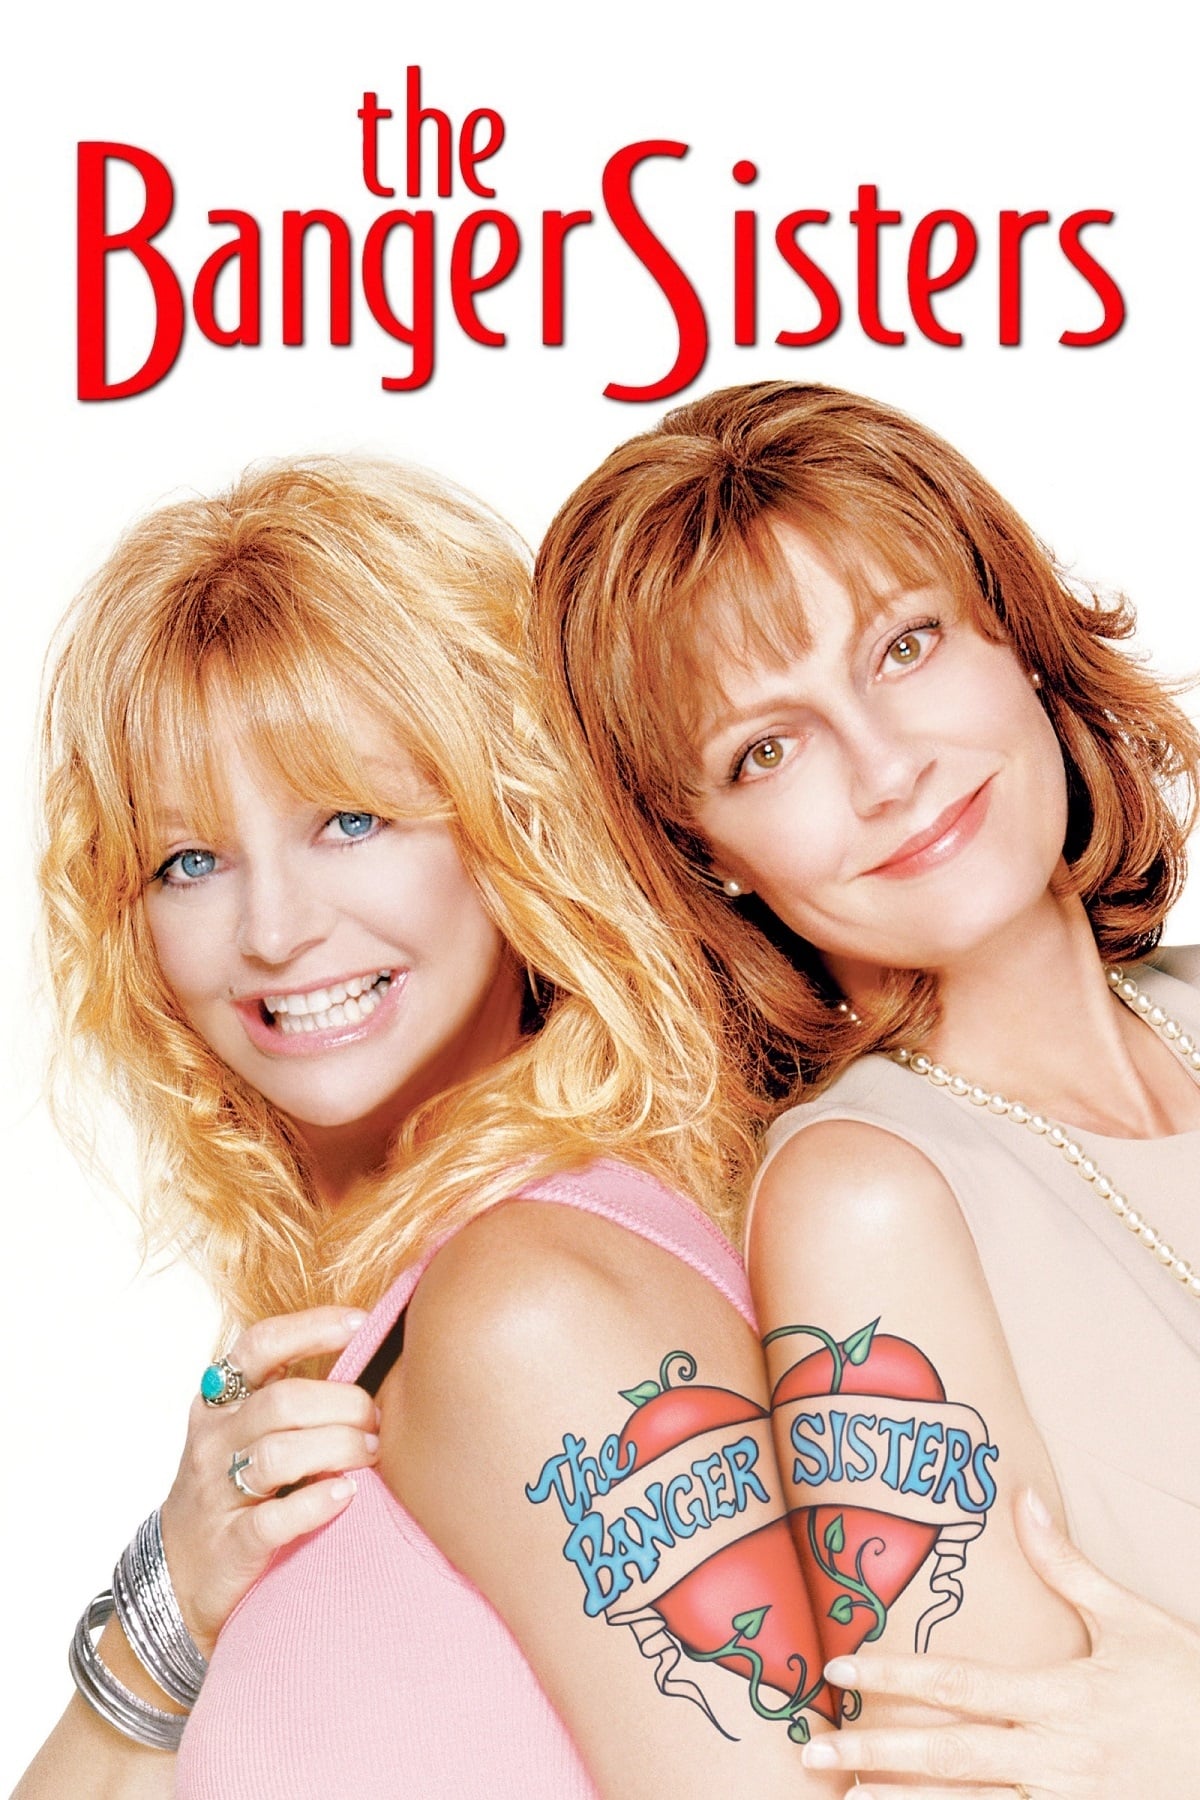 The Banger Sisters (2002)